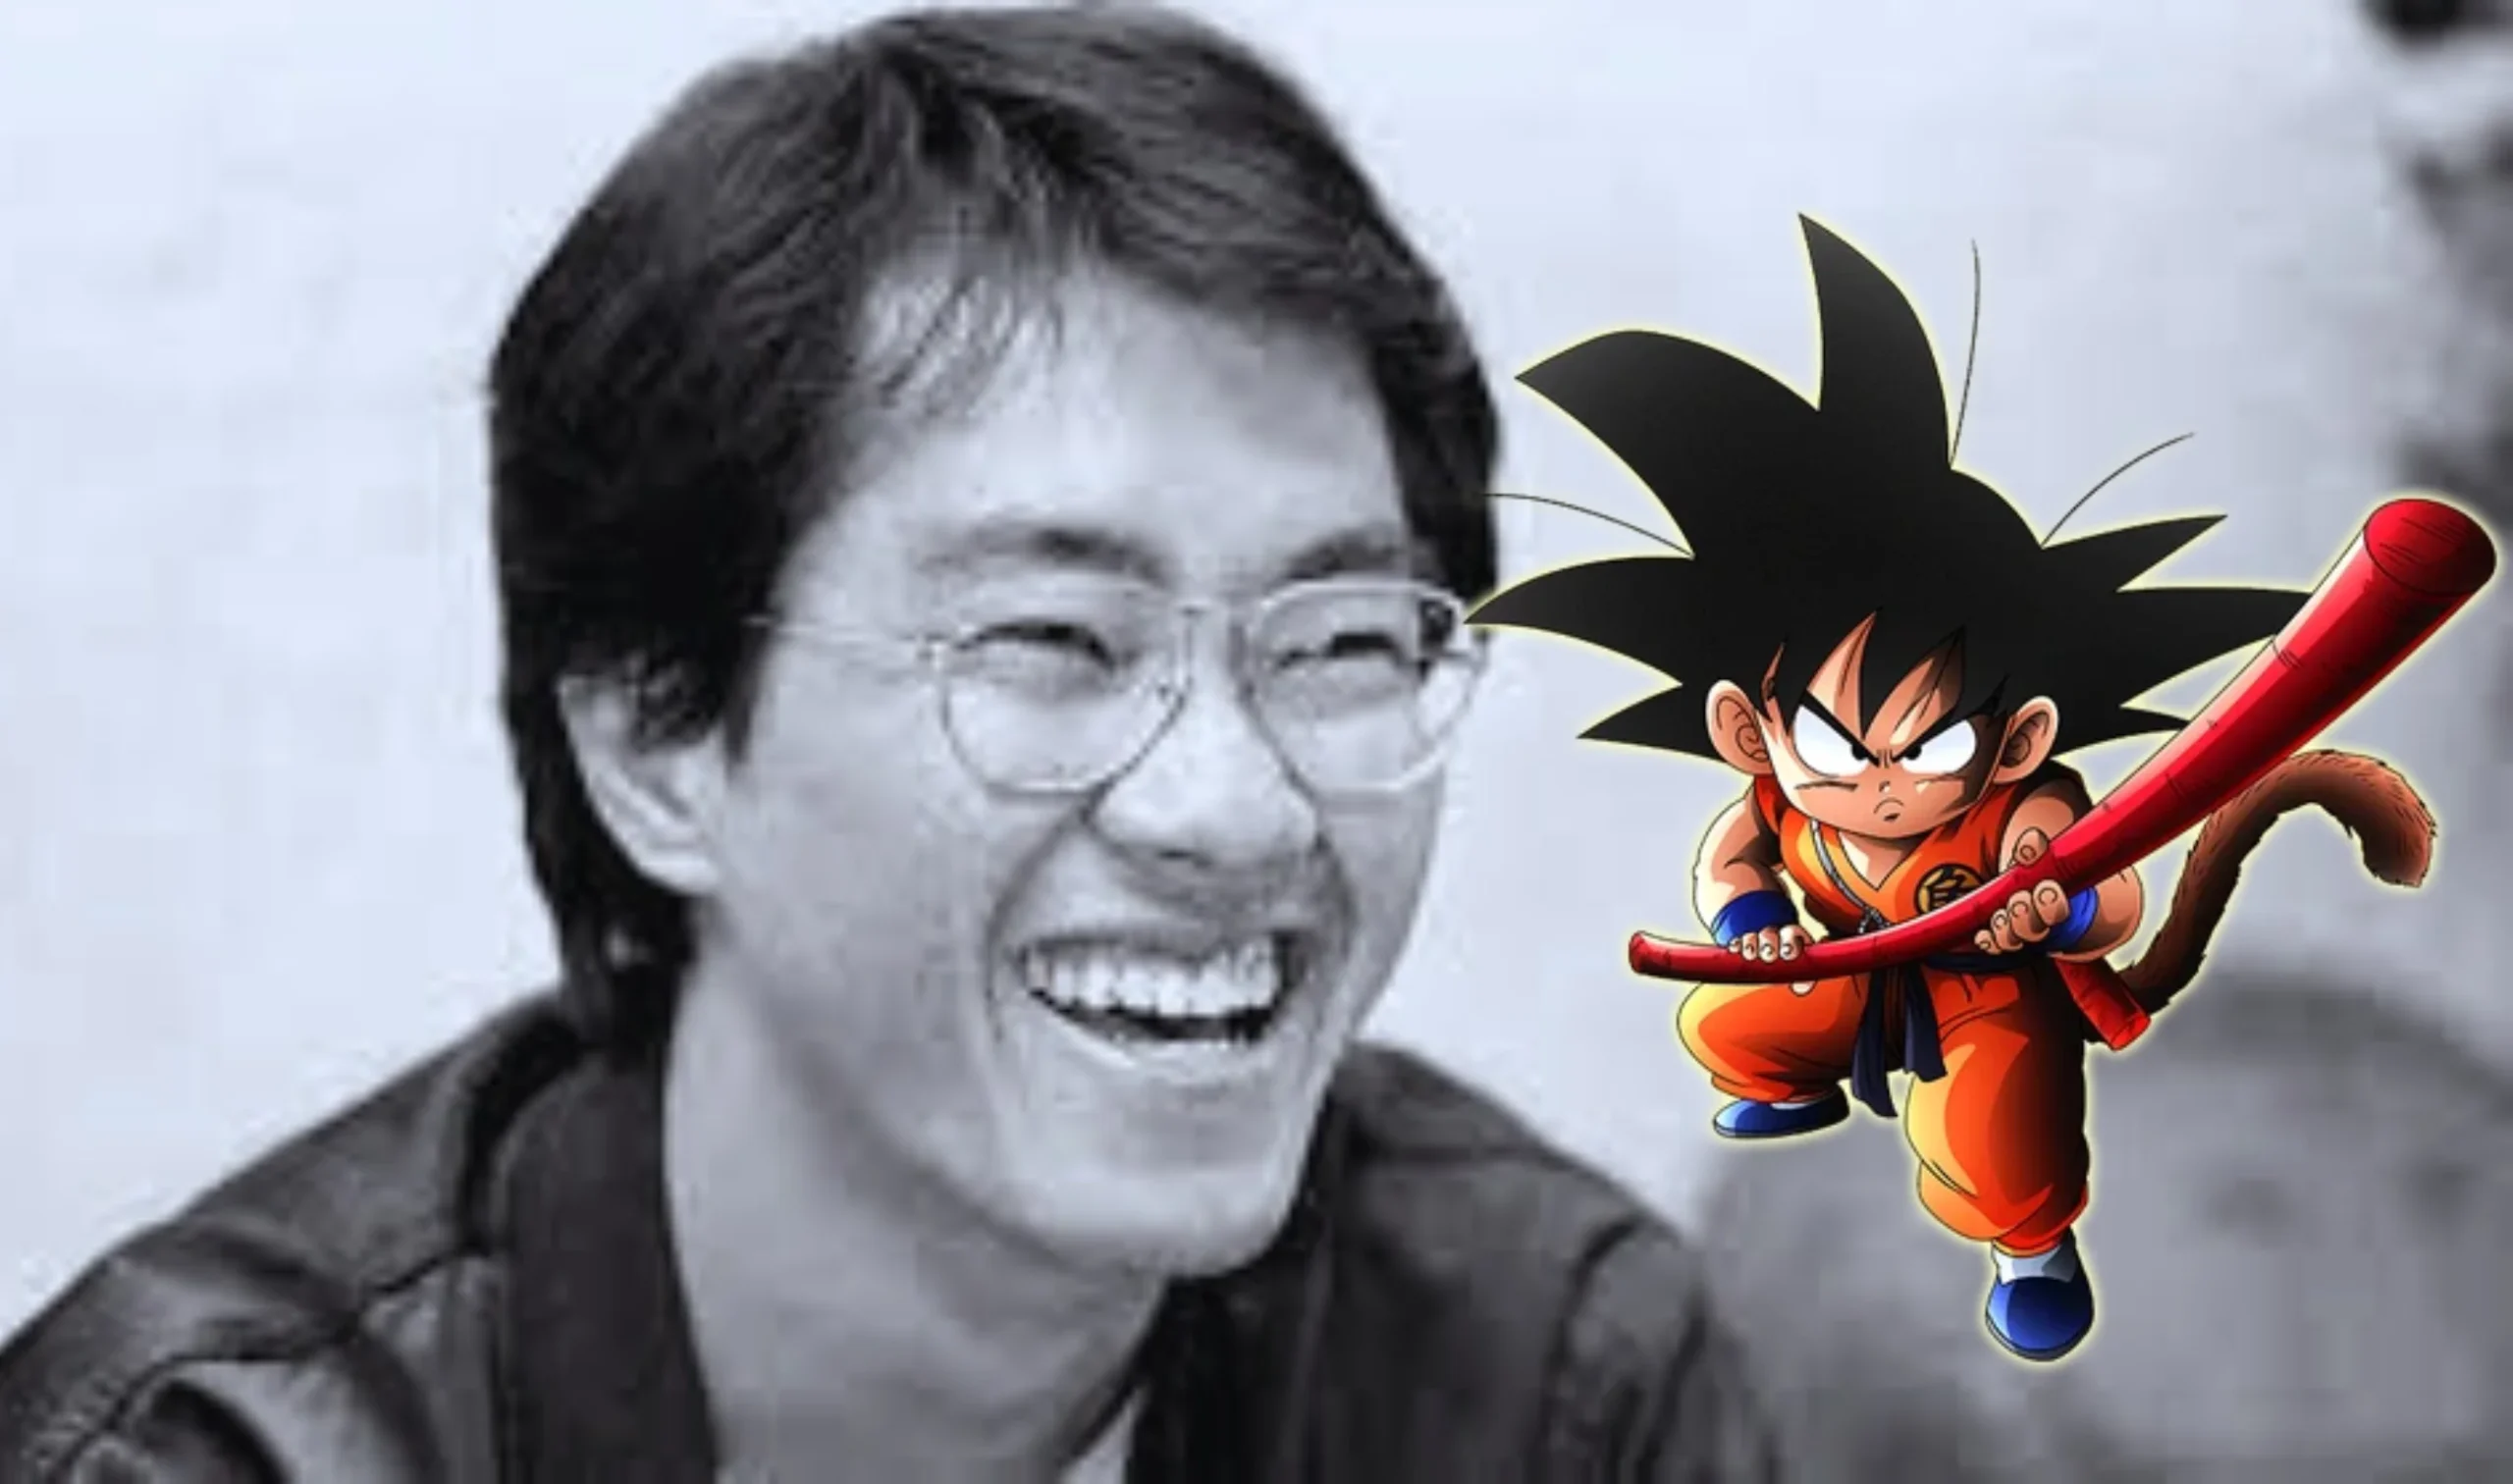 Akira Toriyama Creator of Dragon Ball Died at 68, What Will Happen With Dragon Ball Now?